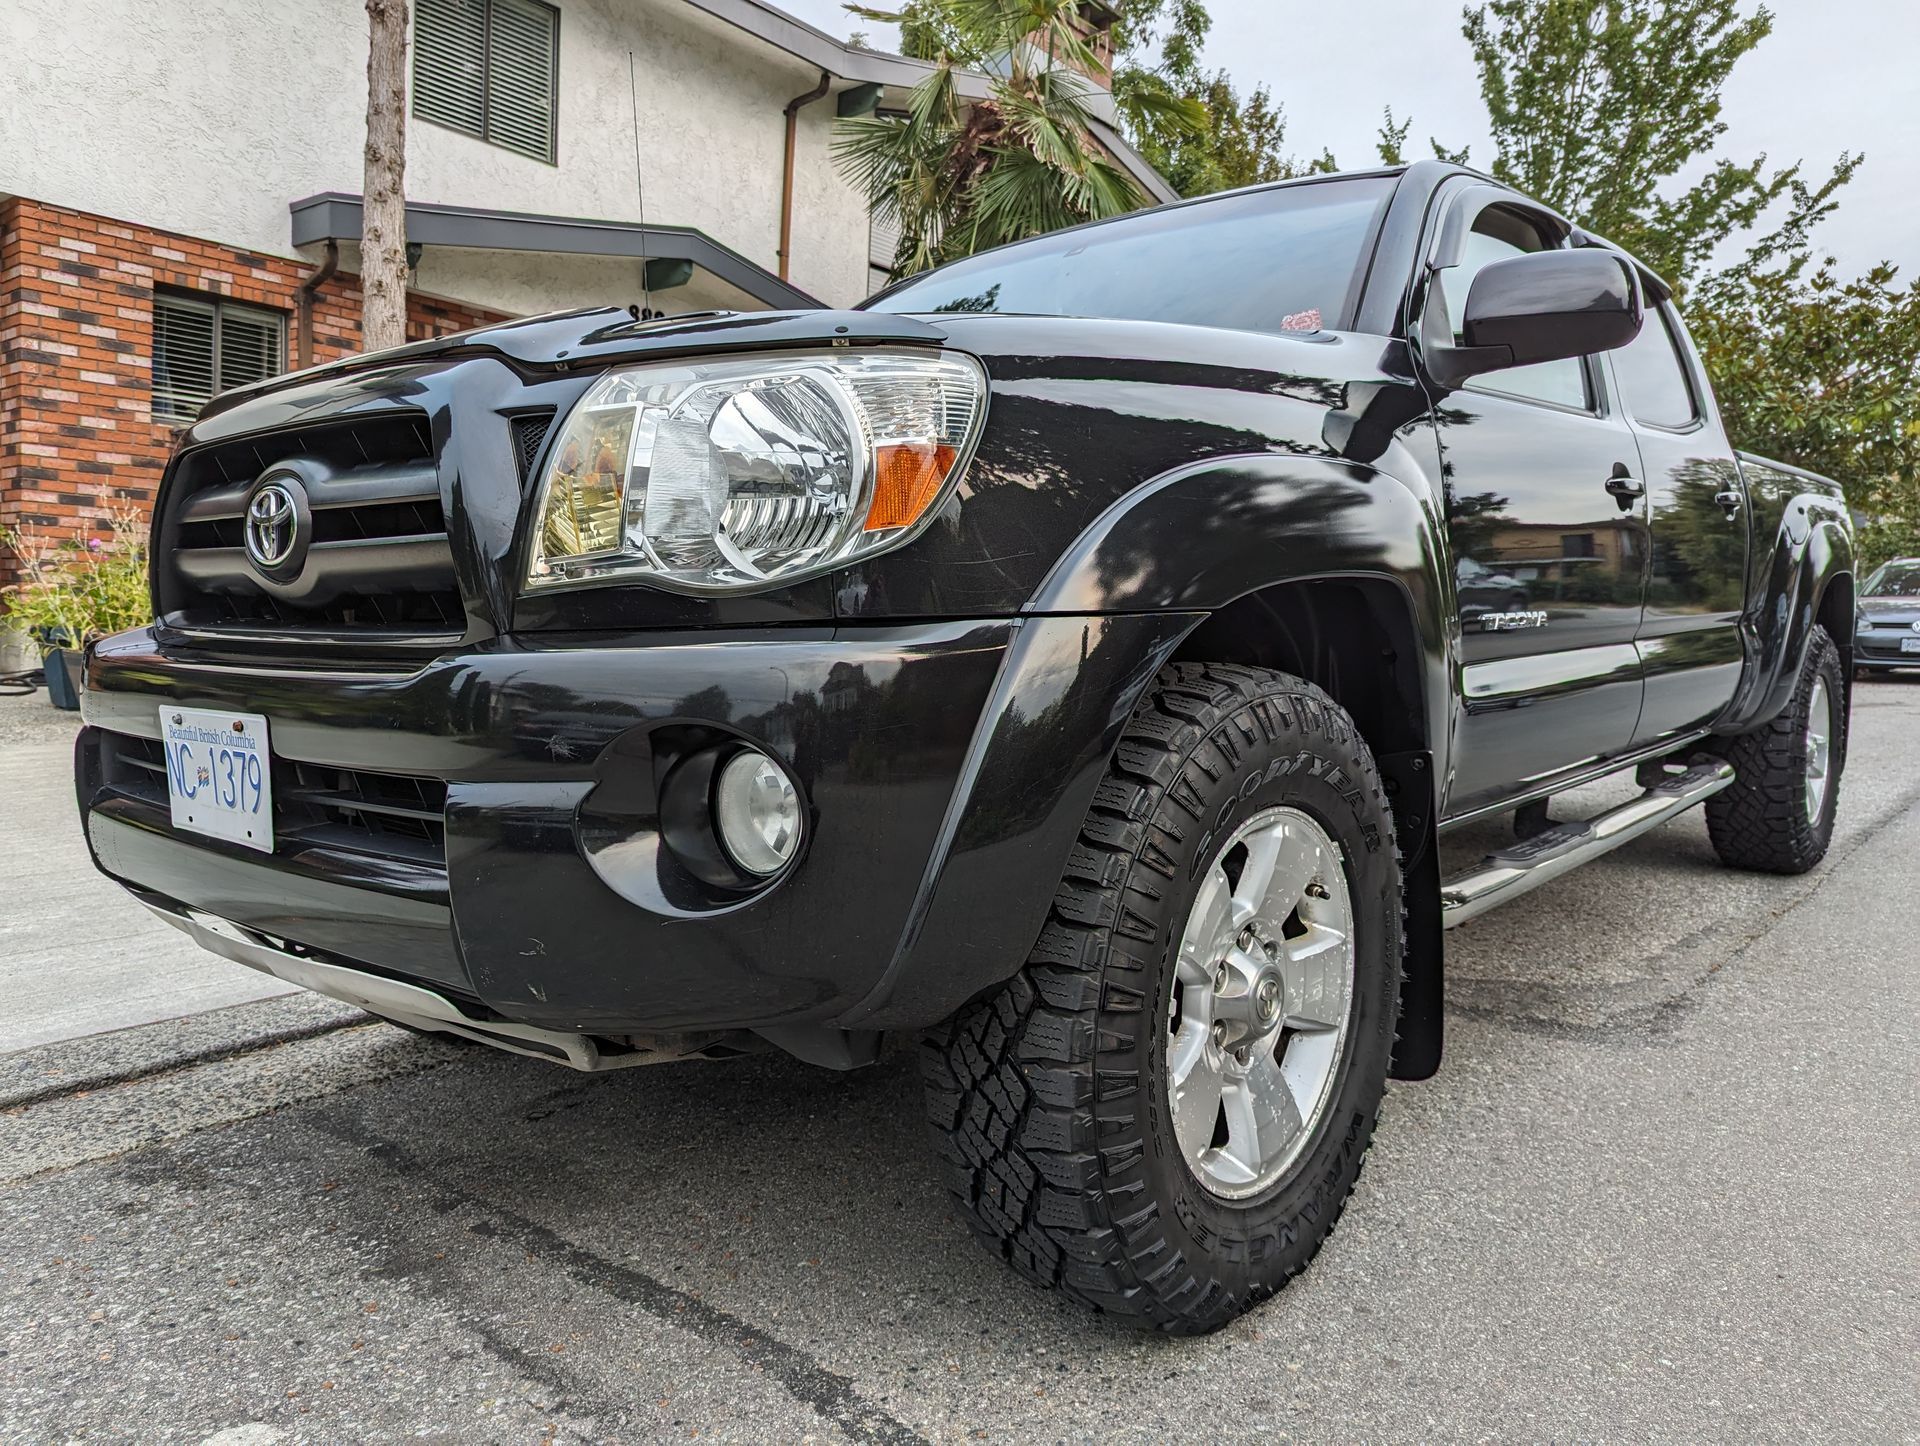 refined and polished black Toyota